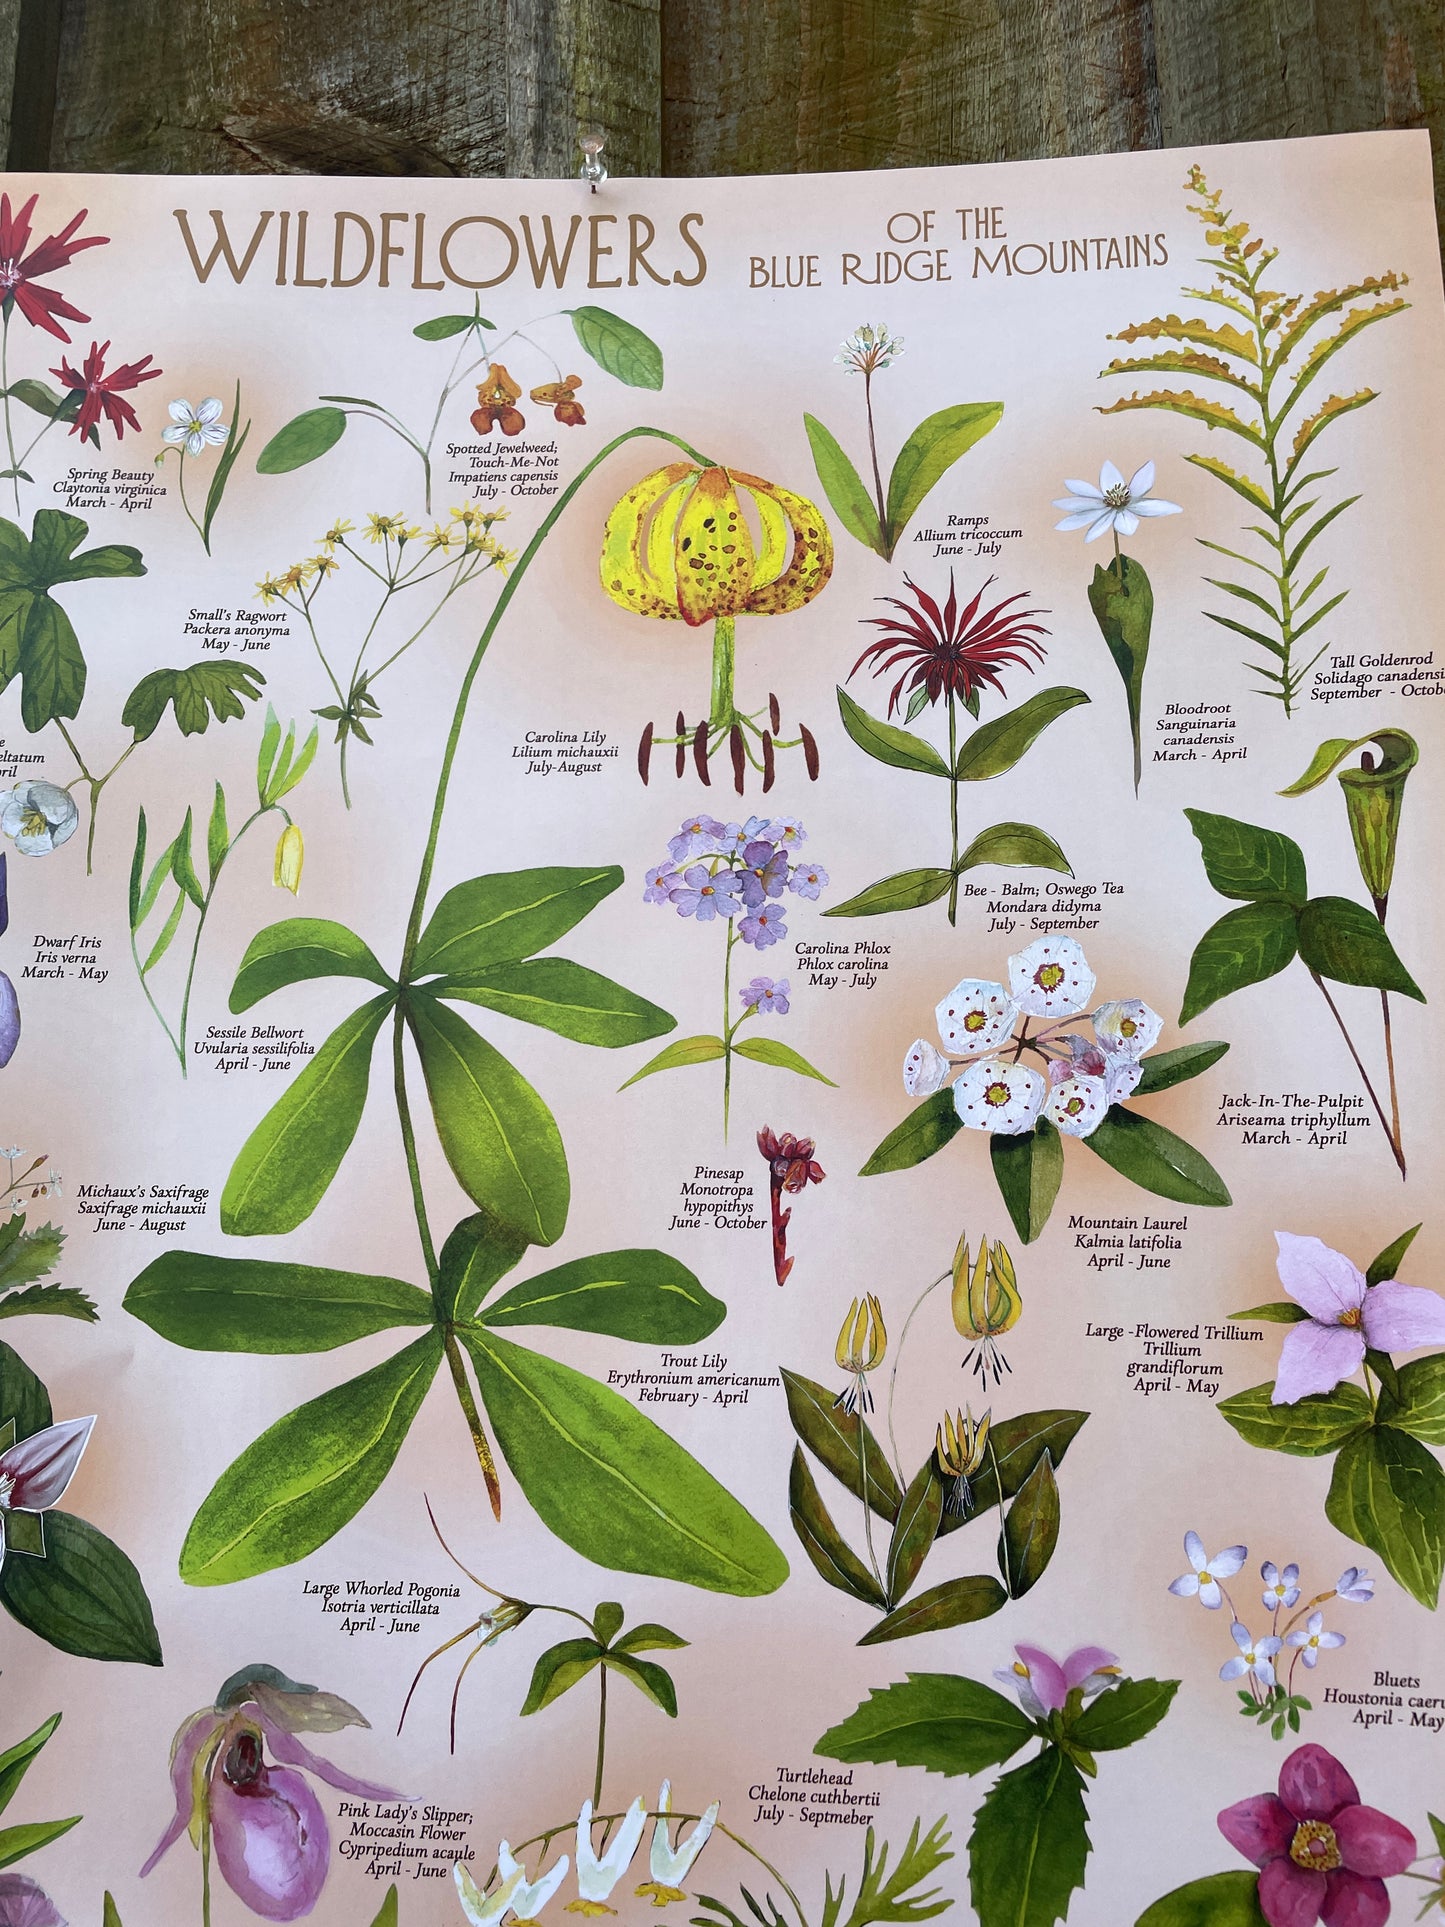 Bright Wildflowers of the Blue Ridge Mountains POSTER 18x24” on Pink/peach